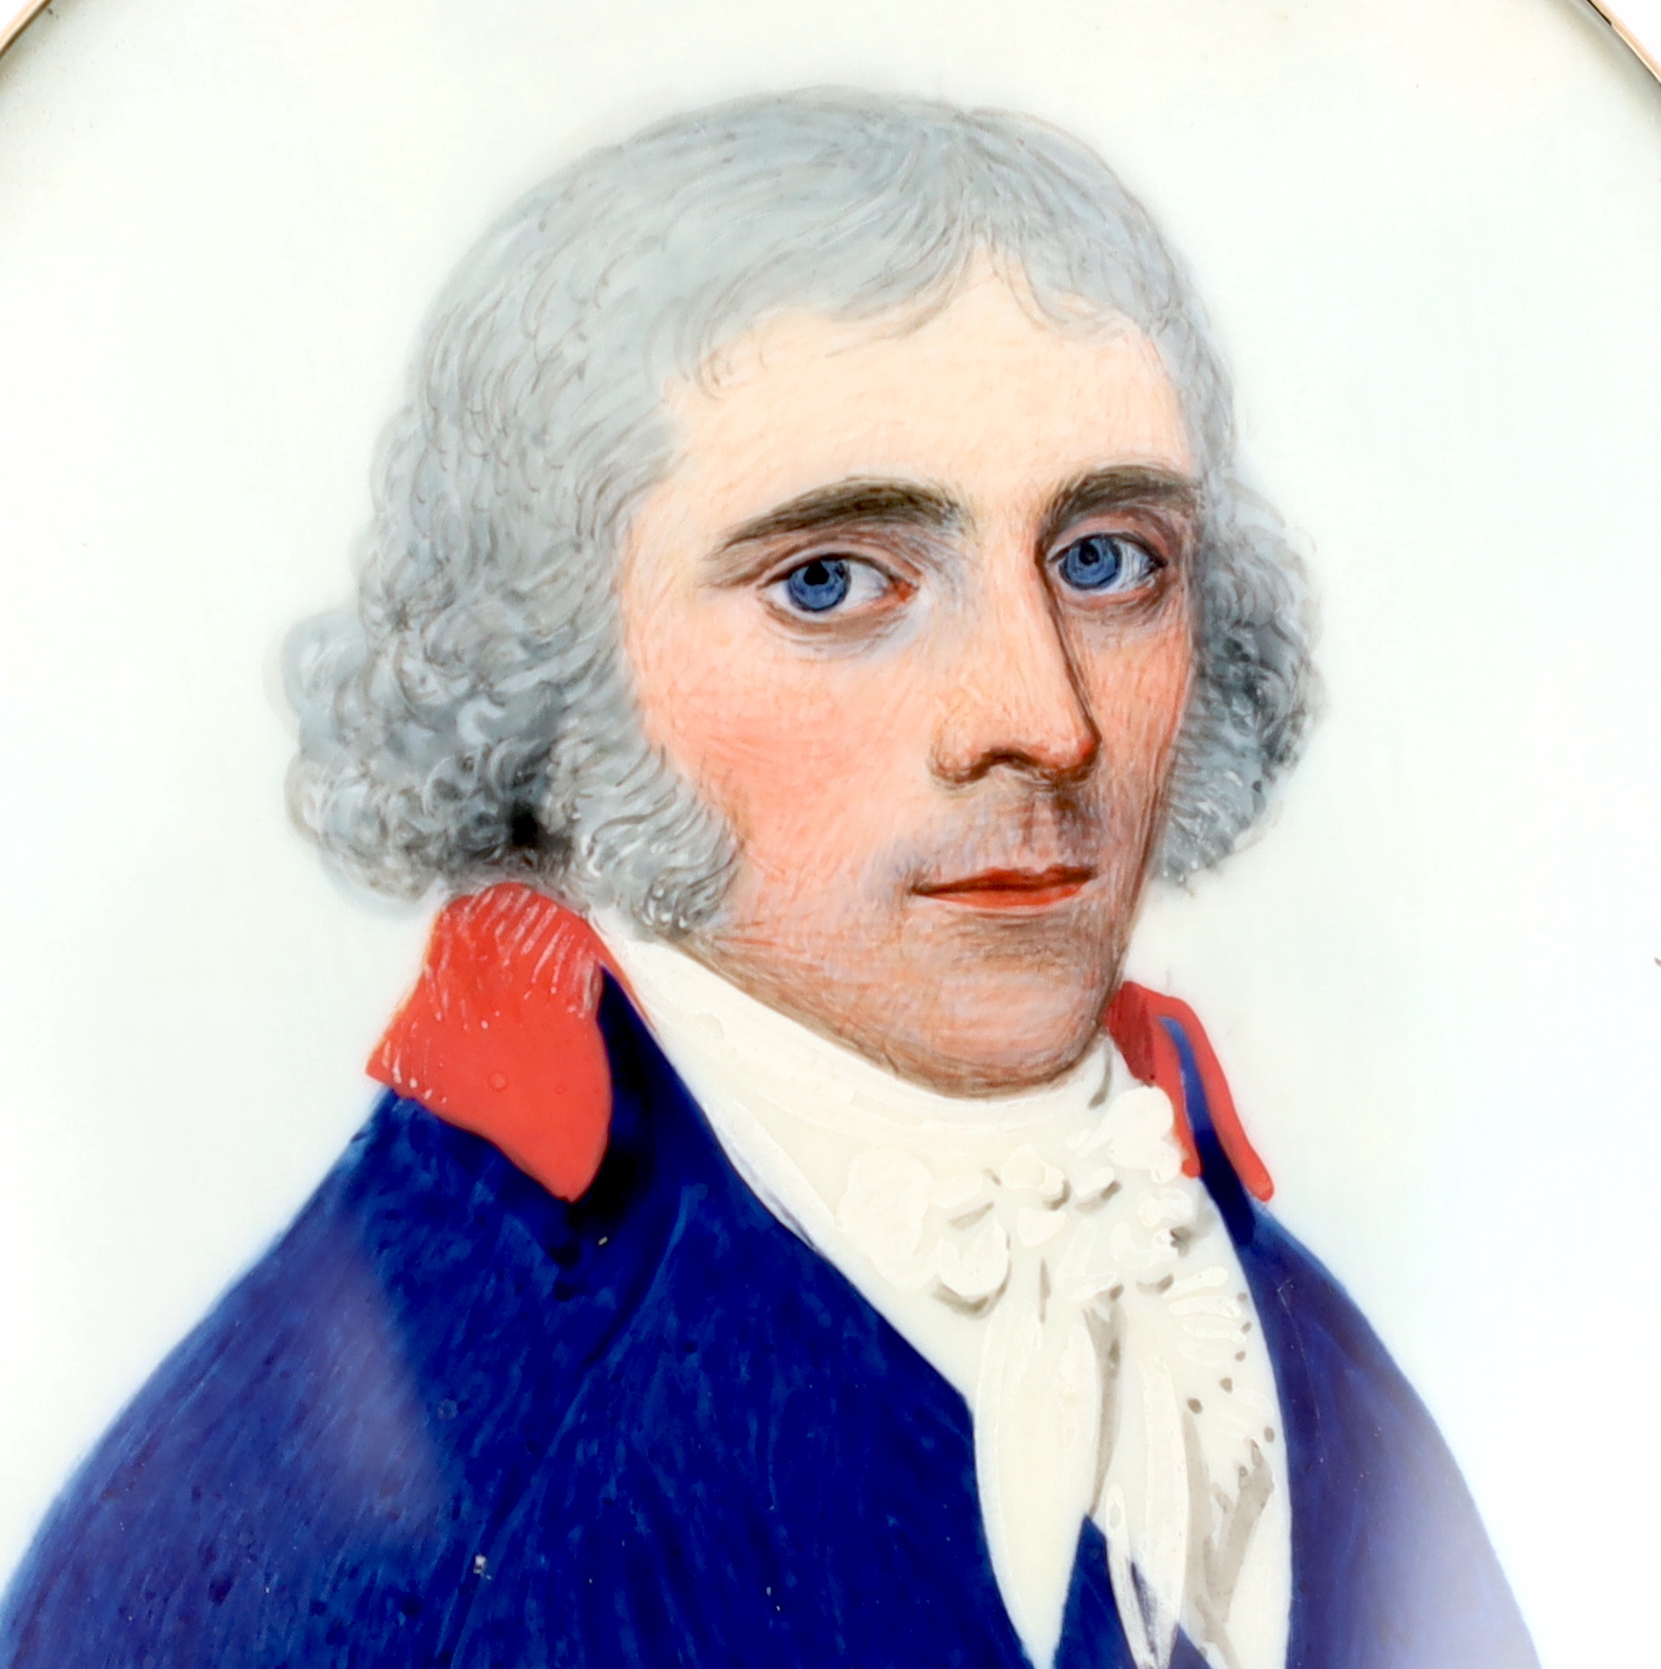 Frederick Buck (Irish, 1771-1840), Portrait miniature of a gentleman, watercolour on ivory, 6.8 x 5.4cm. CITES Submission reference XVH4AMC7